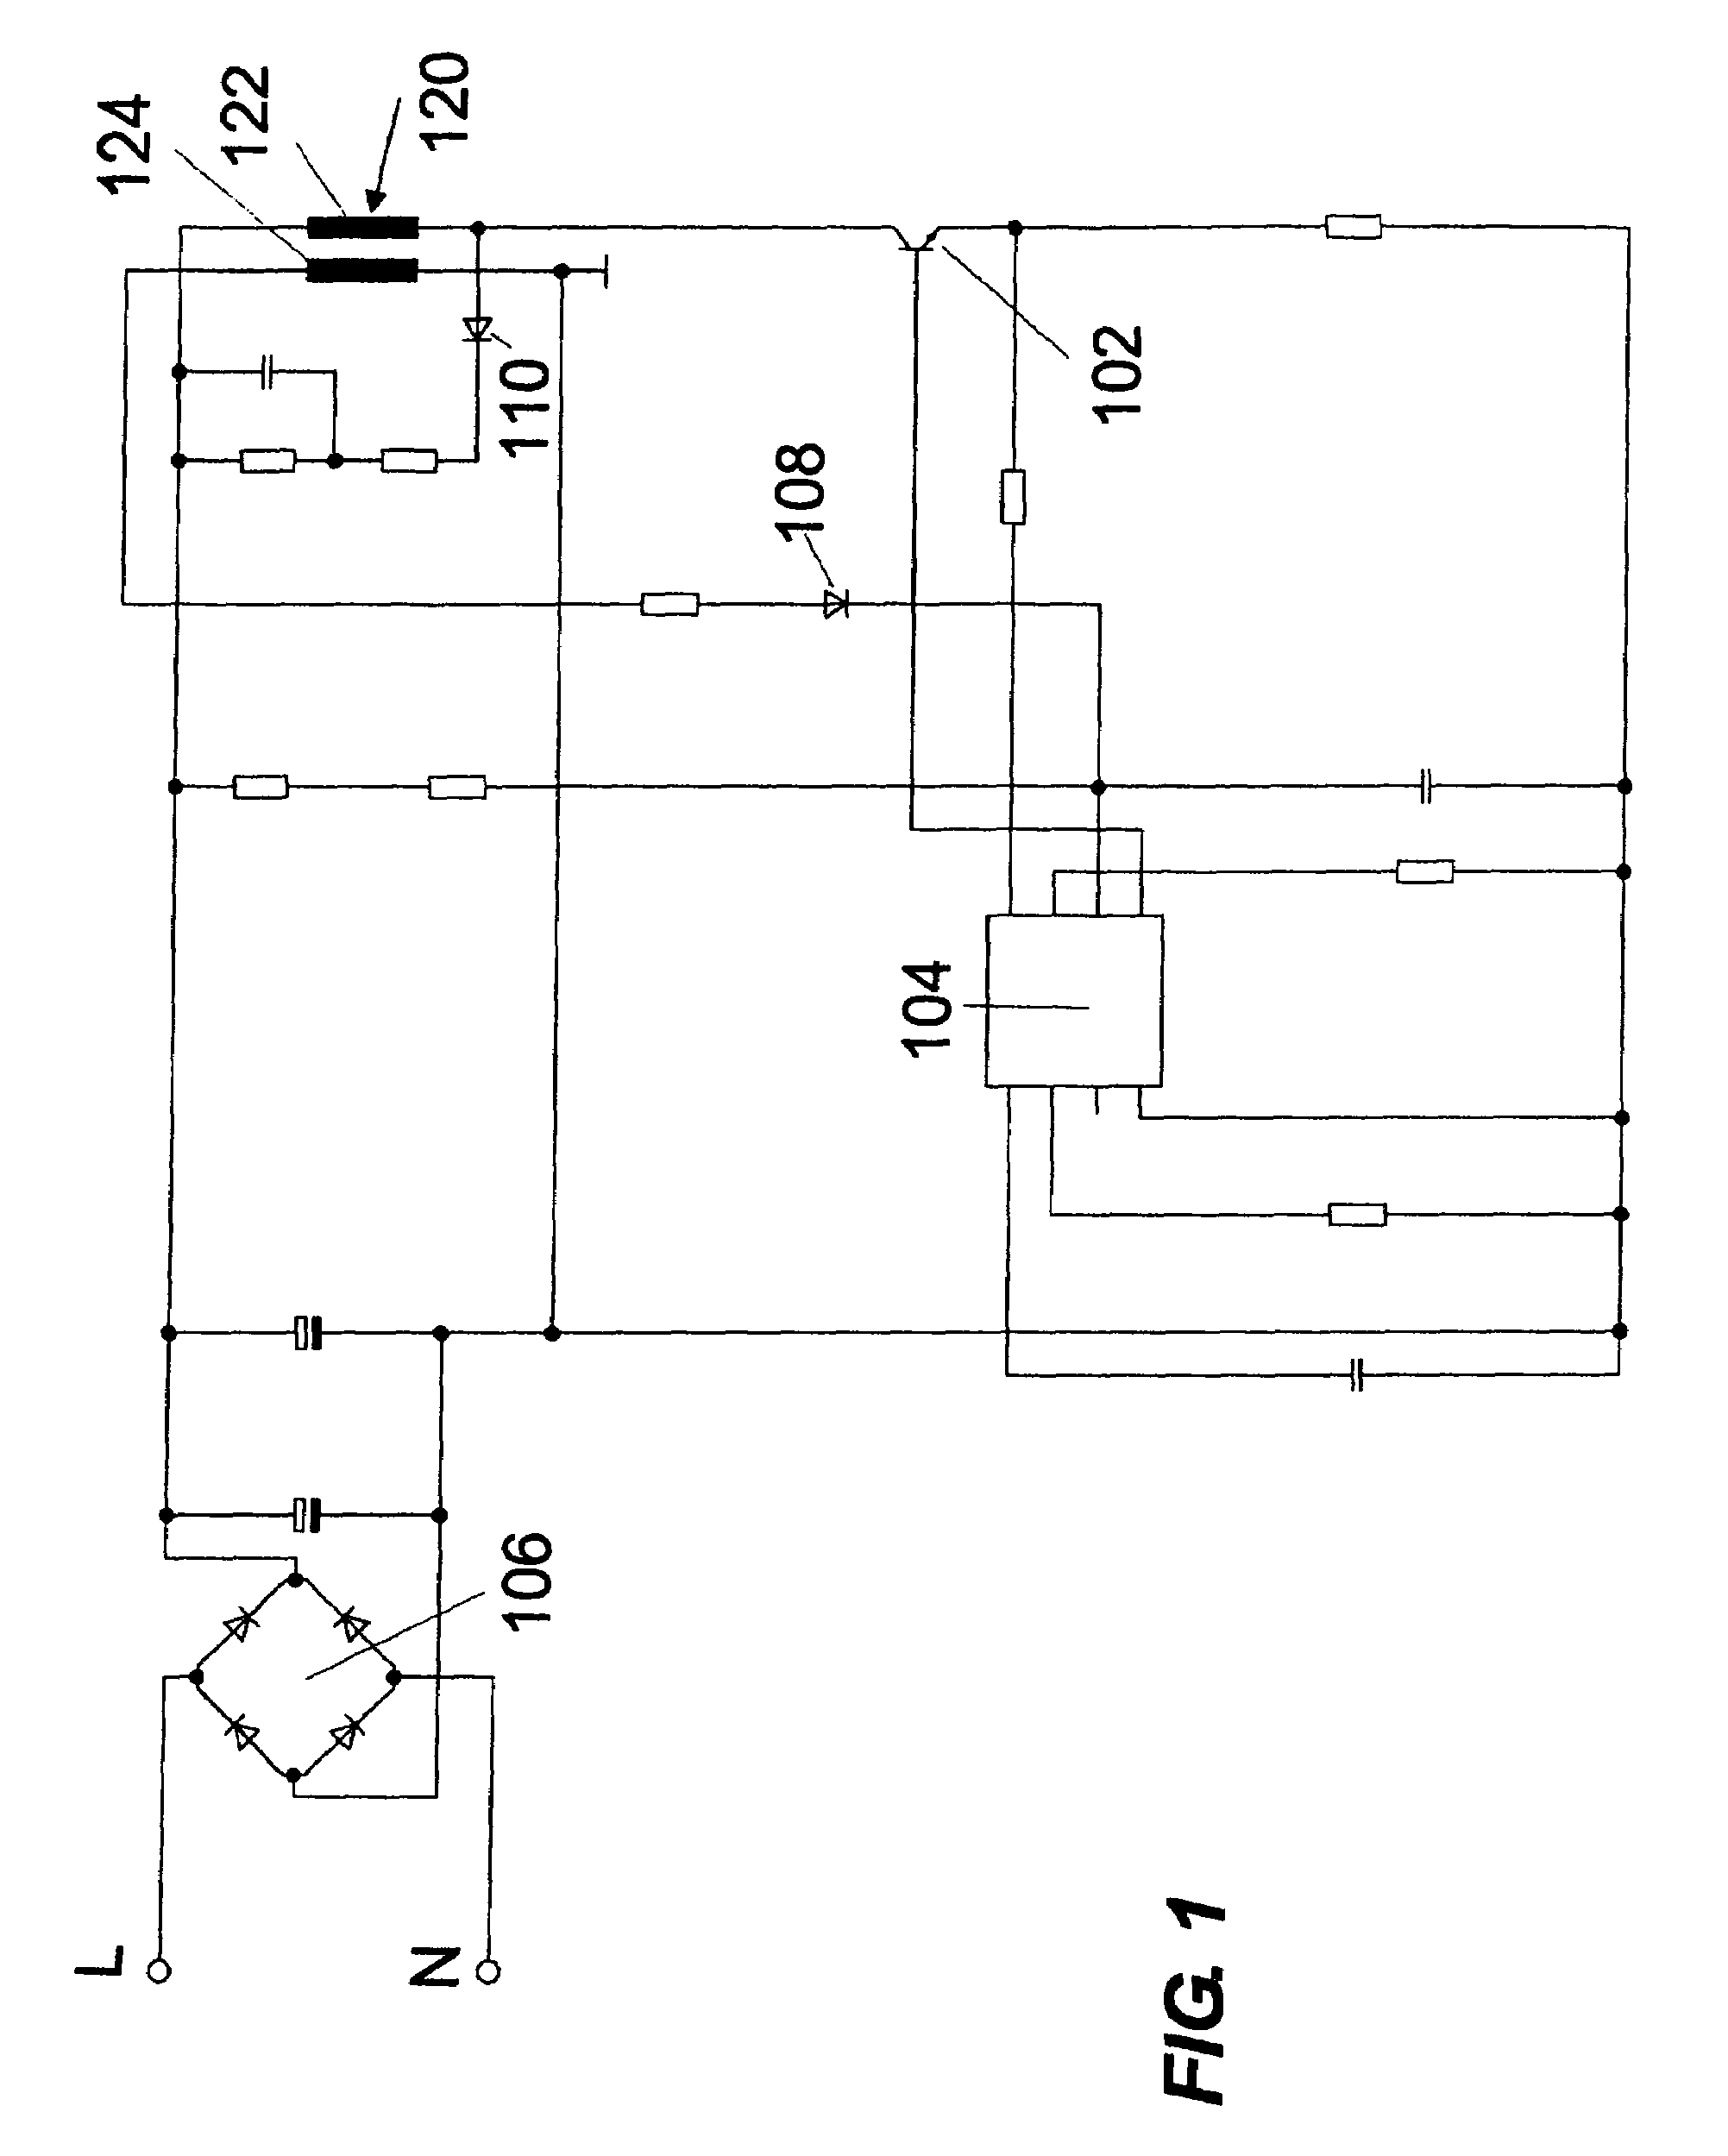 Active primary-sided circuit arrangement for a switch-mode power supply